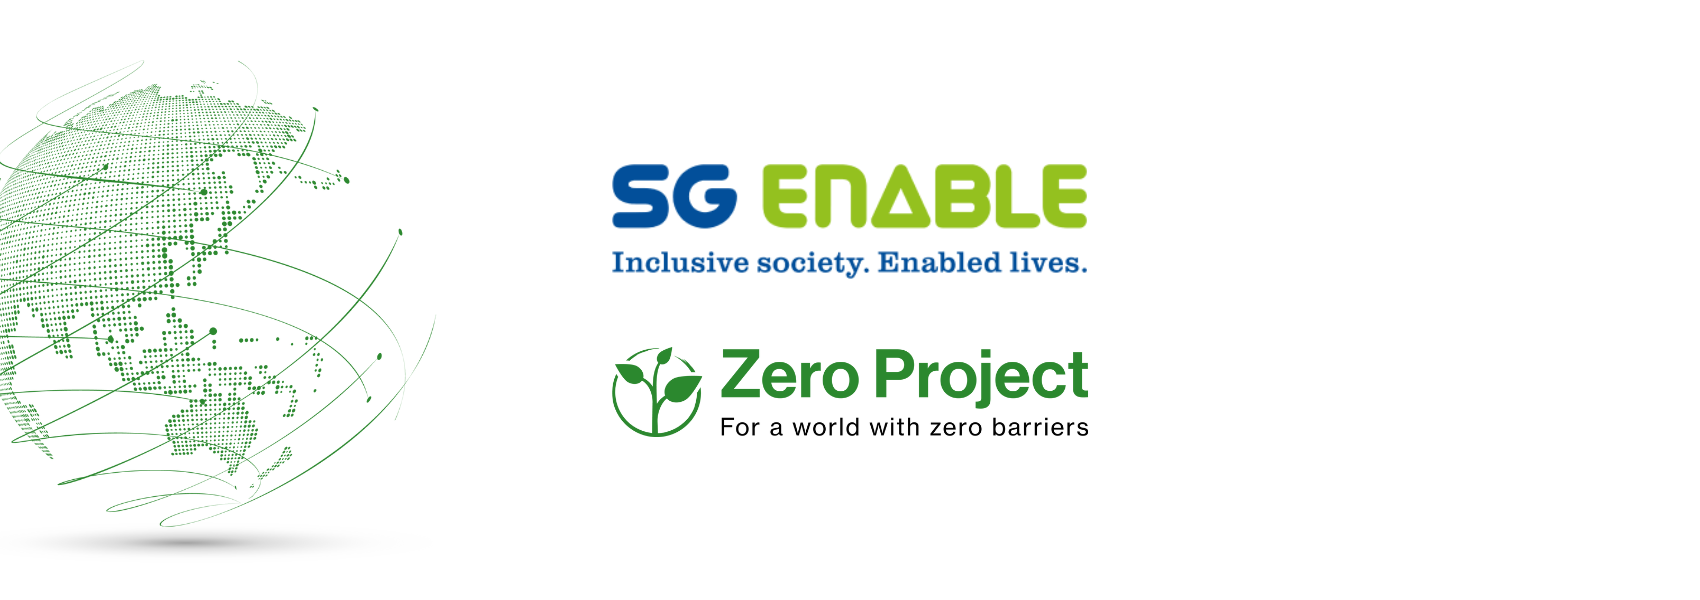 the logos of SG Enable and the Zero Project next to a globe showing the region around Singapore